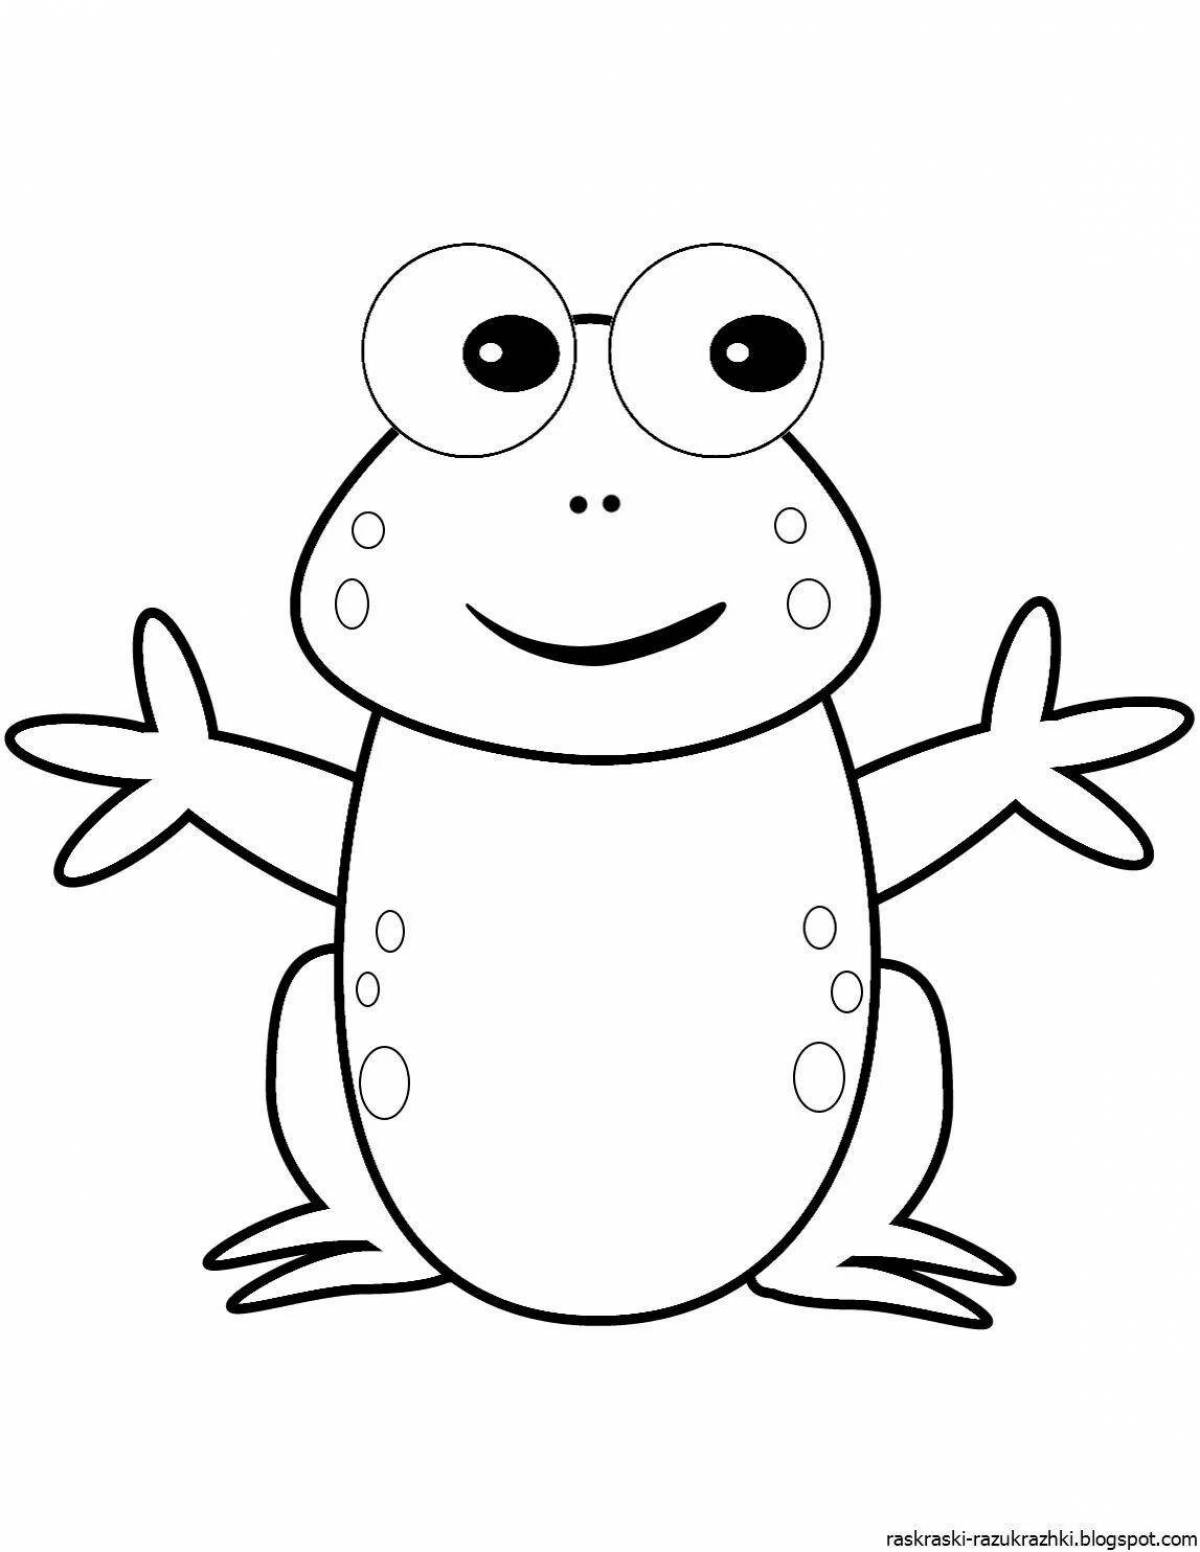 Fun coloring frog for kids